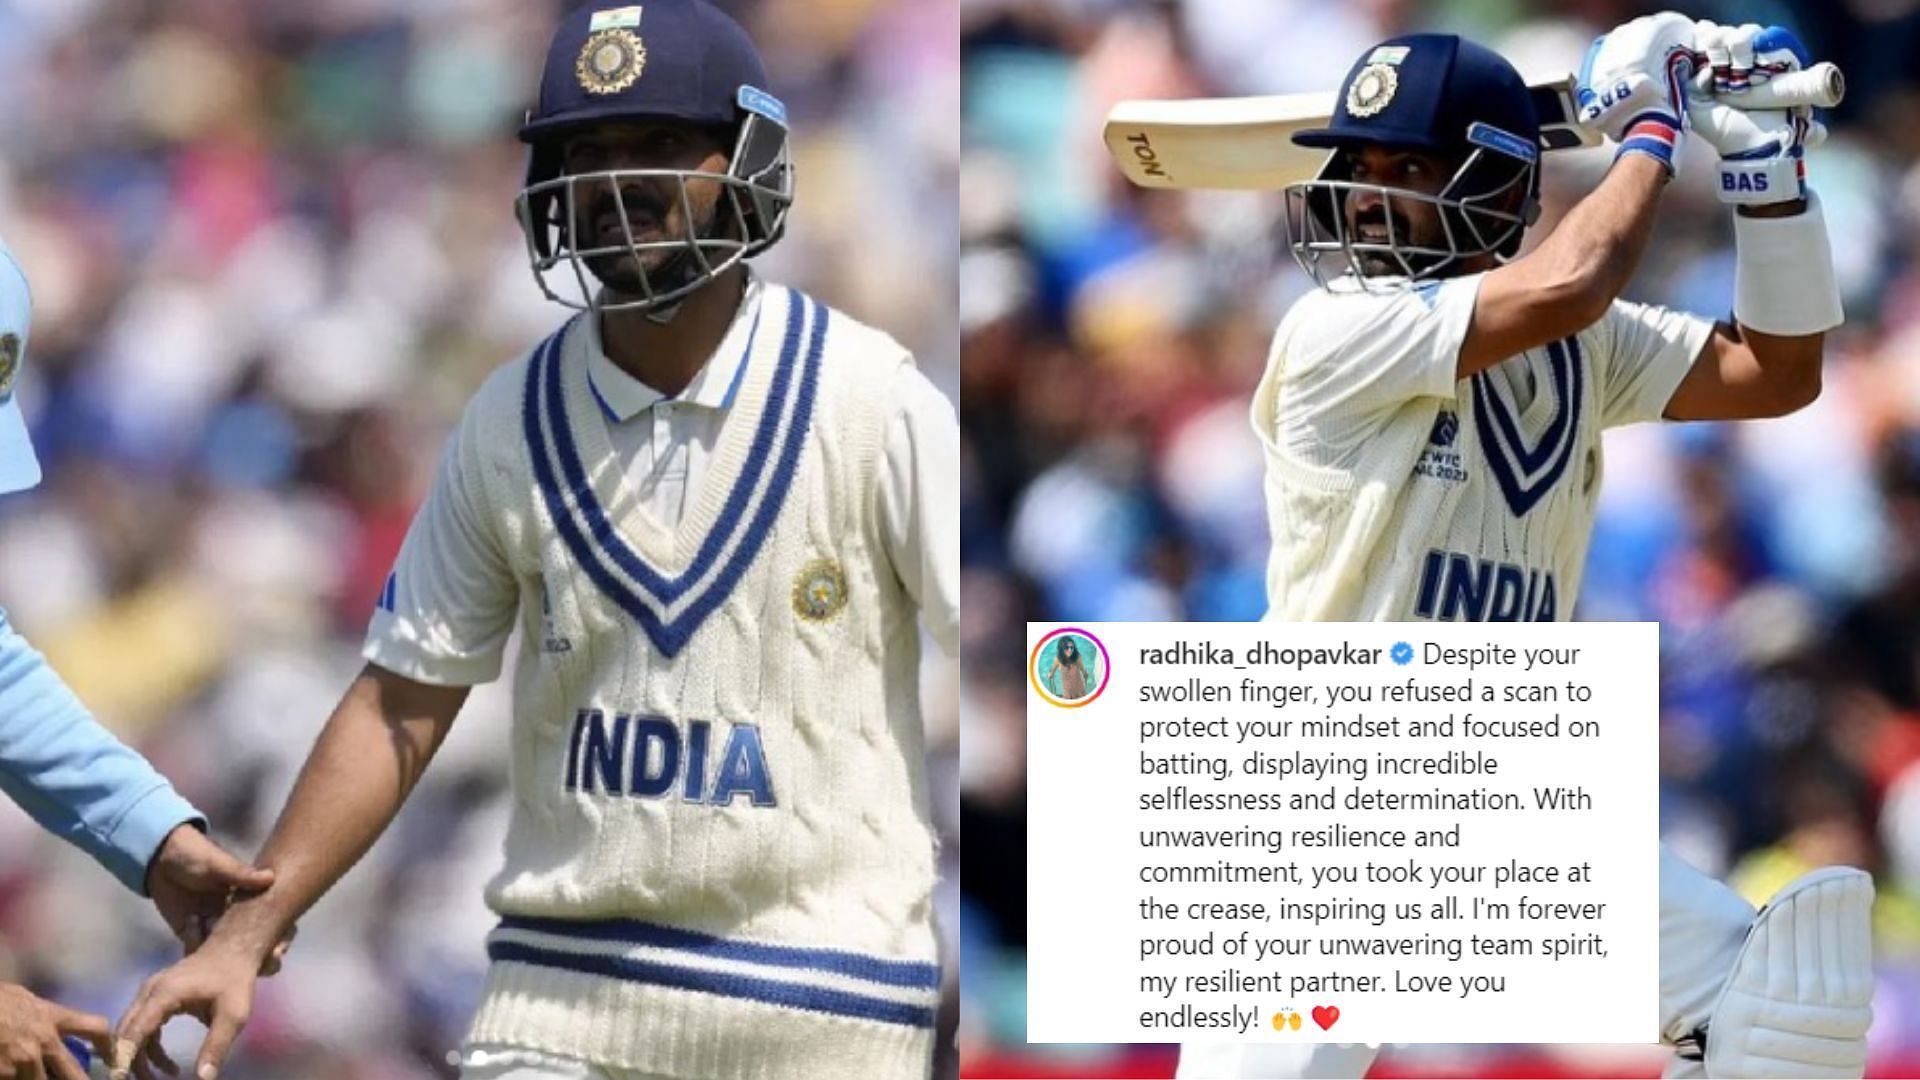 Ajinkya Rahane's wife Radhika pens emotional message after batter 'refused a scan' during his brave 89 in WTC final